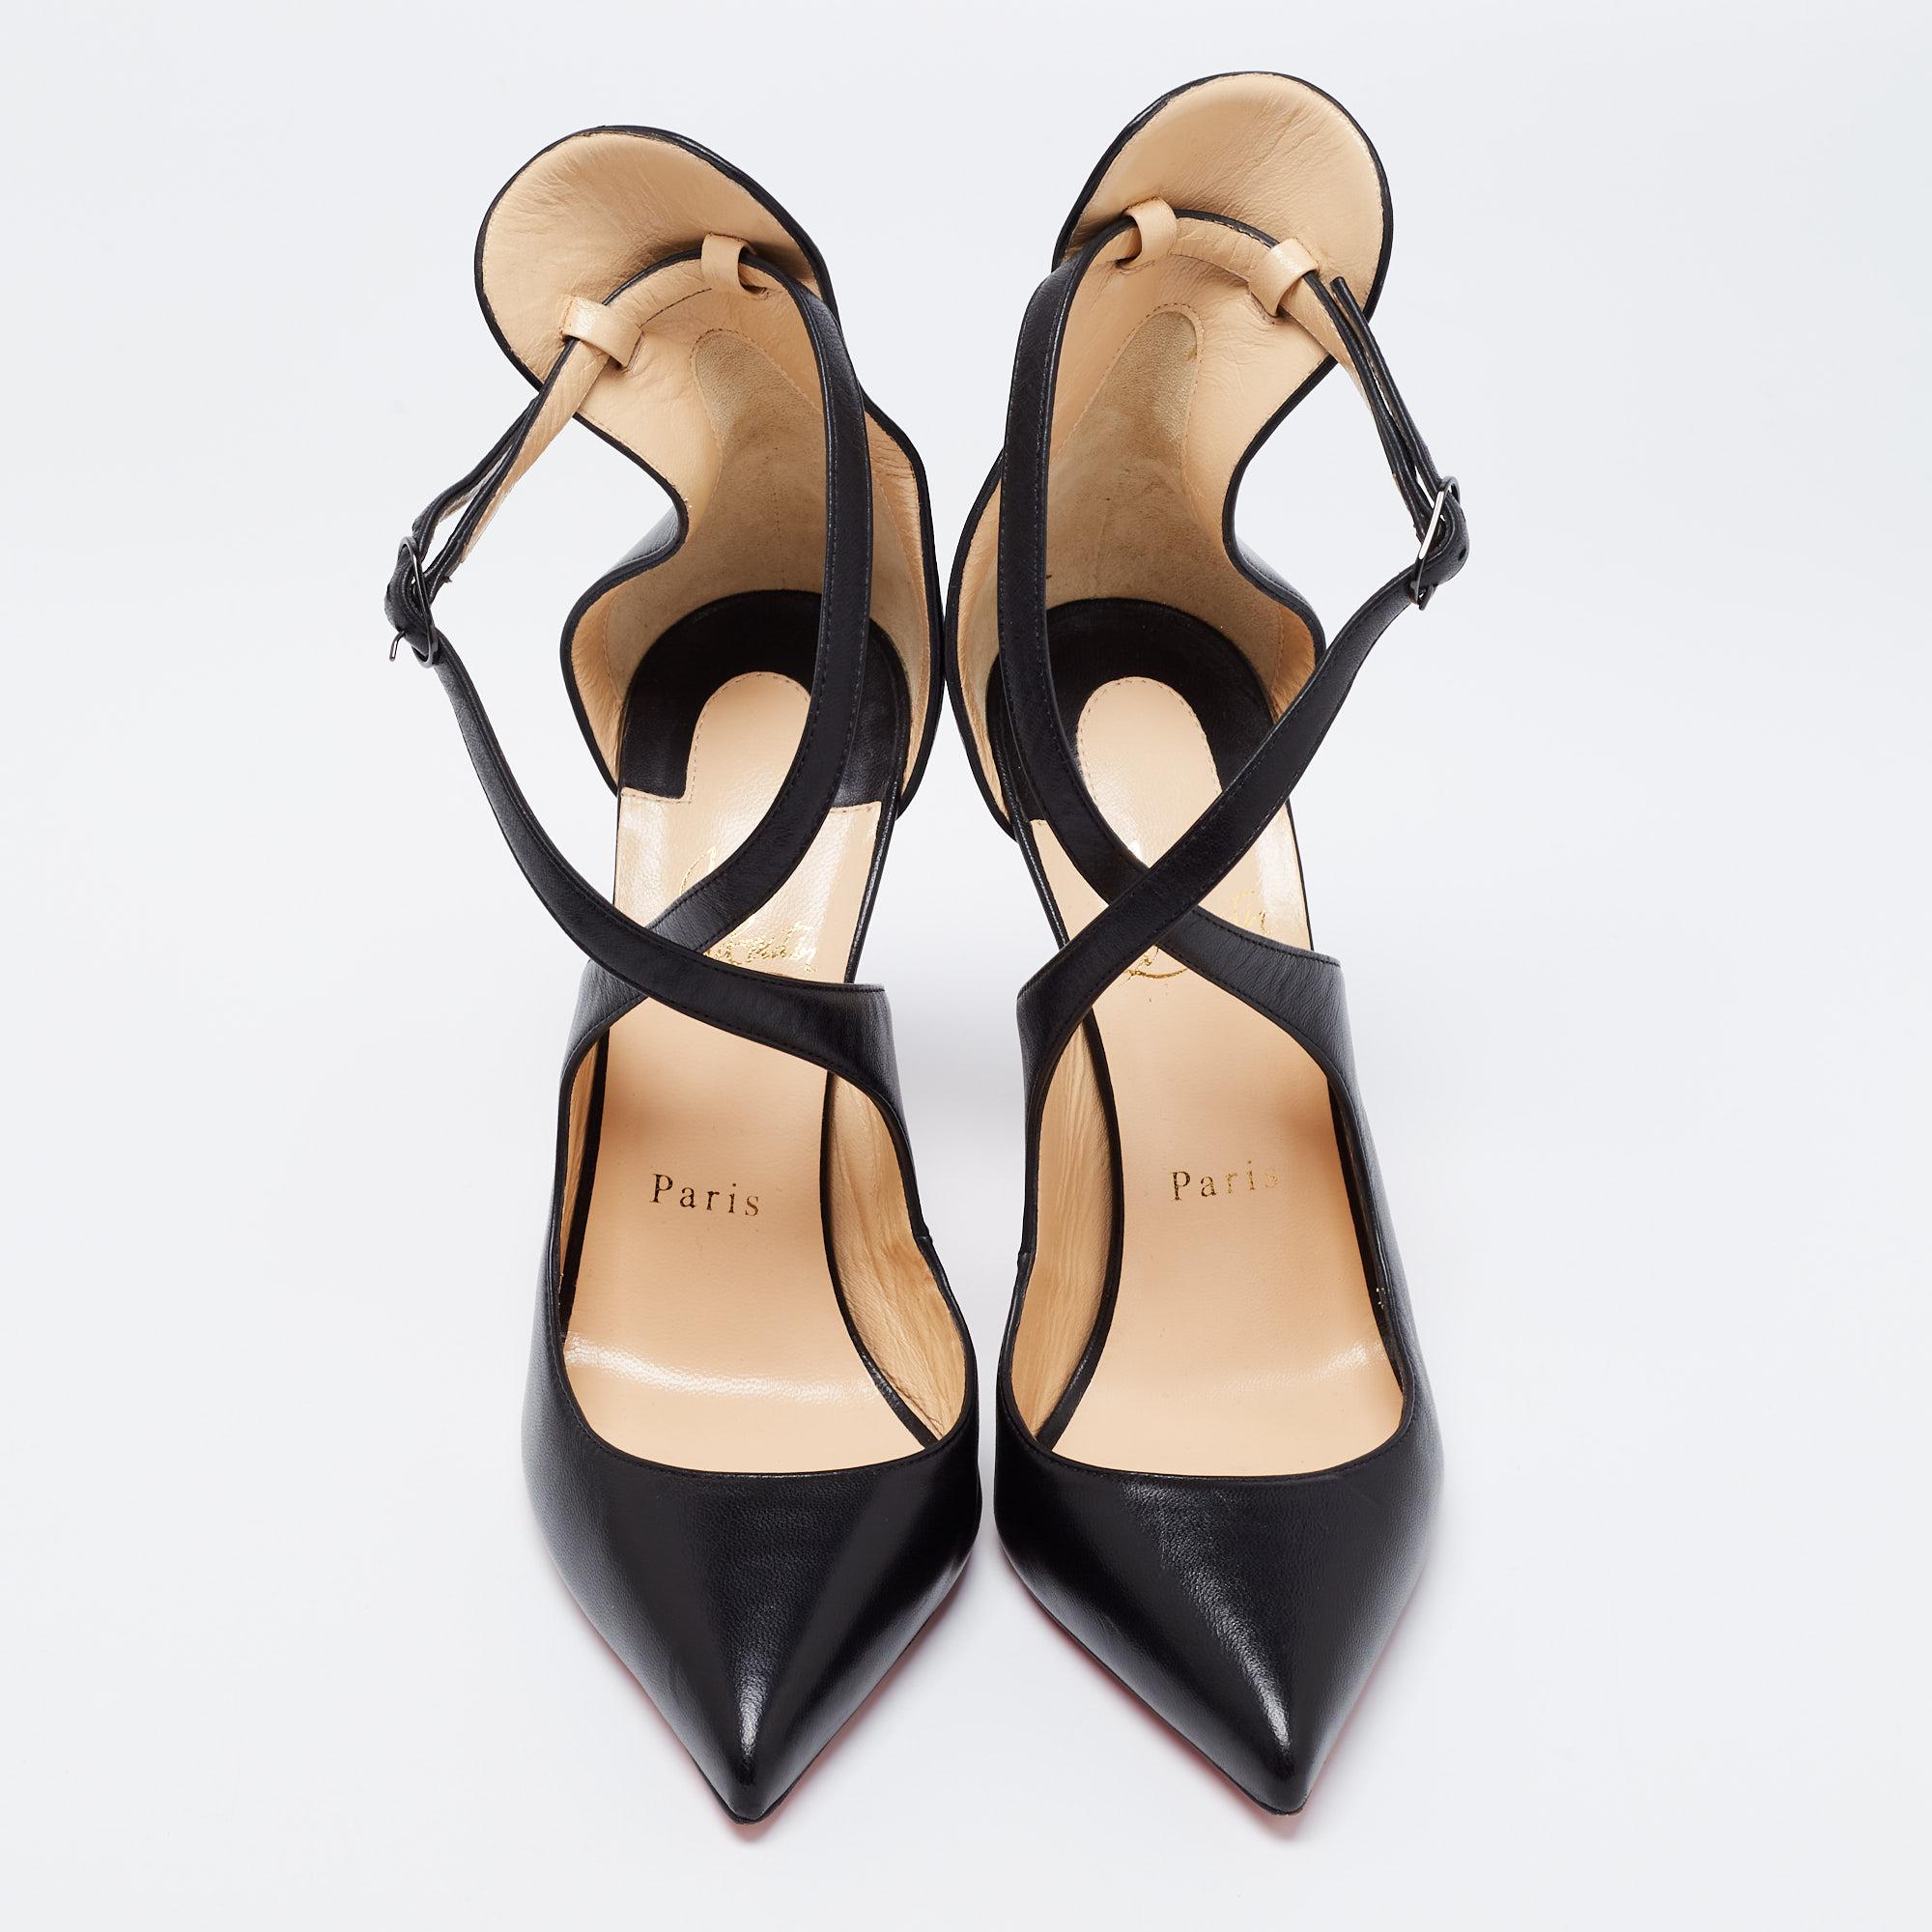 Skilfully crafted from black leather, these pointed-toe Christian Louboutin pumps come ready to give you a high-fashion experience. The rich pumps, with sharp cuts and cross straps with buckles, are balanced on 12.5 cm heels and finished with the